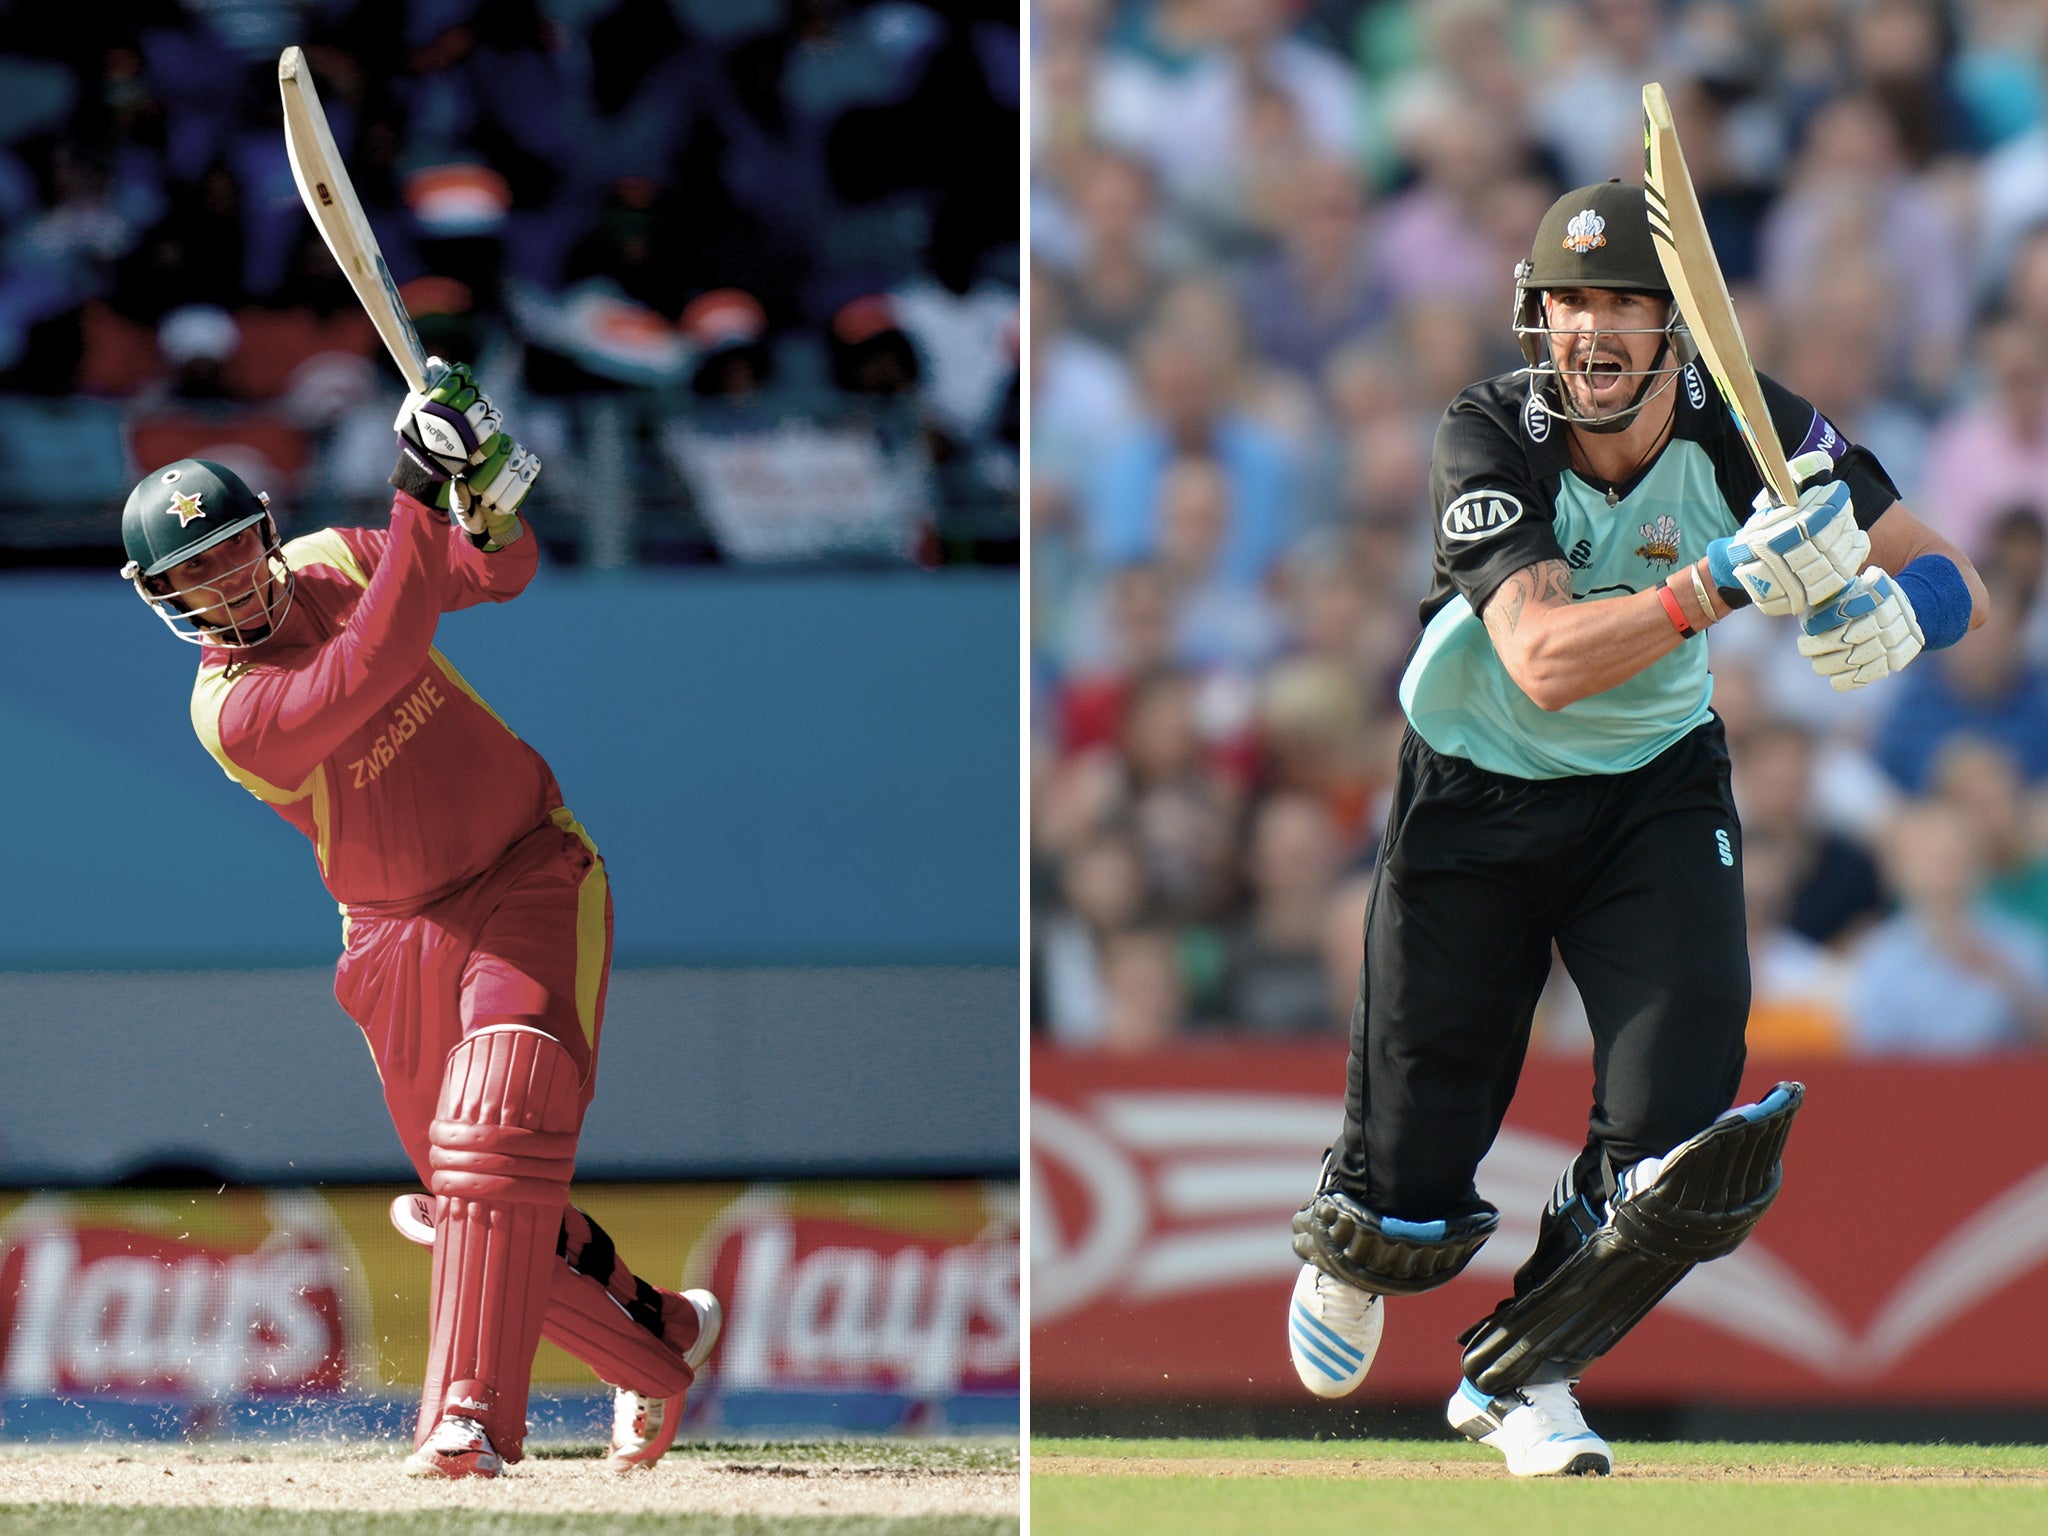 Taylor (left) has signed for Nottinghamshire, while Pietersen has re-joined Surrey